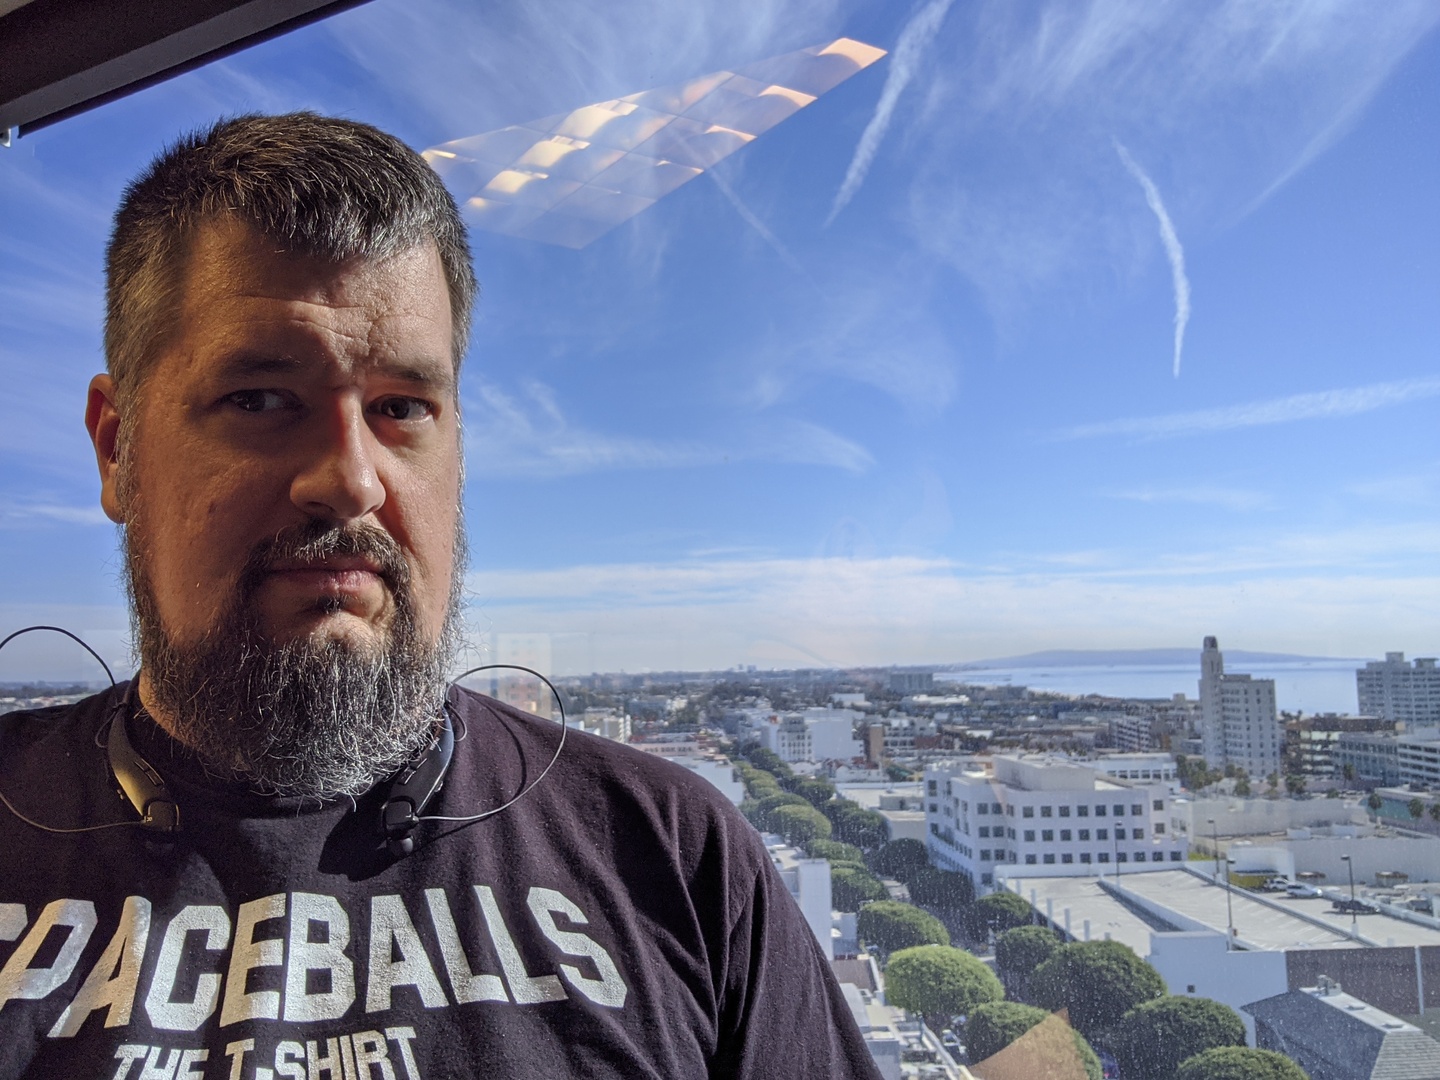 Selfie of me in front of a window in Ziprecruiter HQ looking out over Santa Monica.